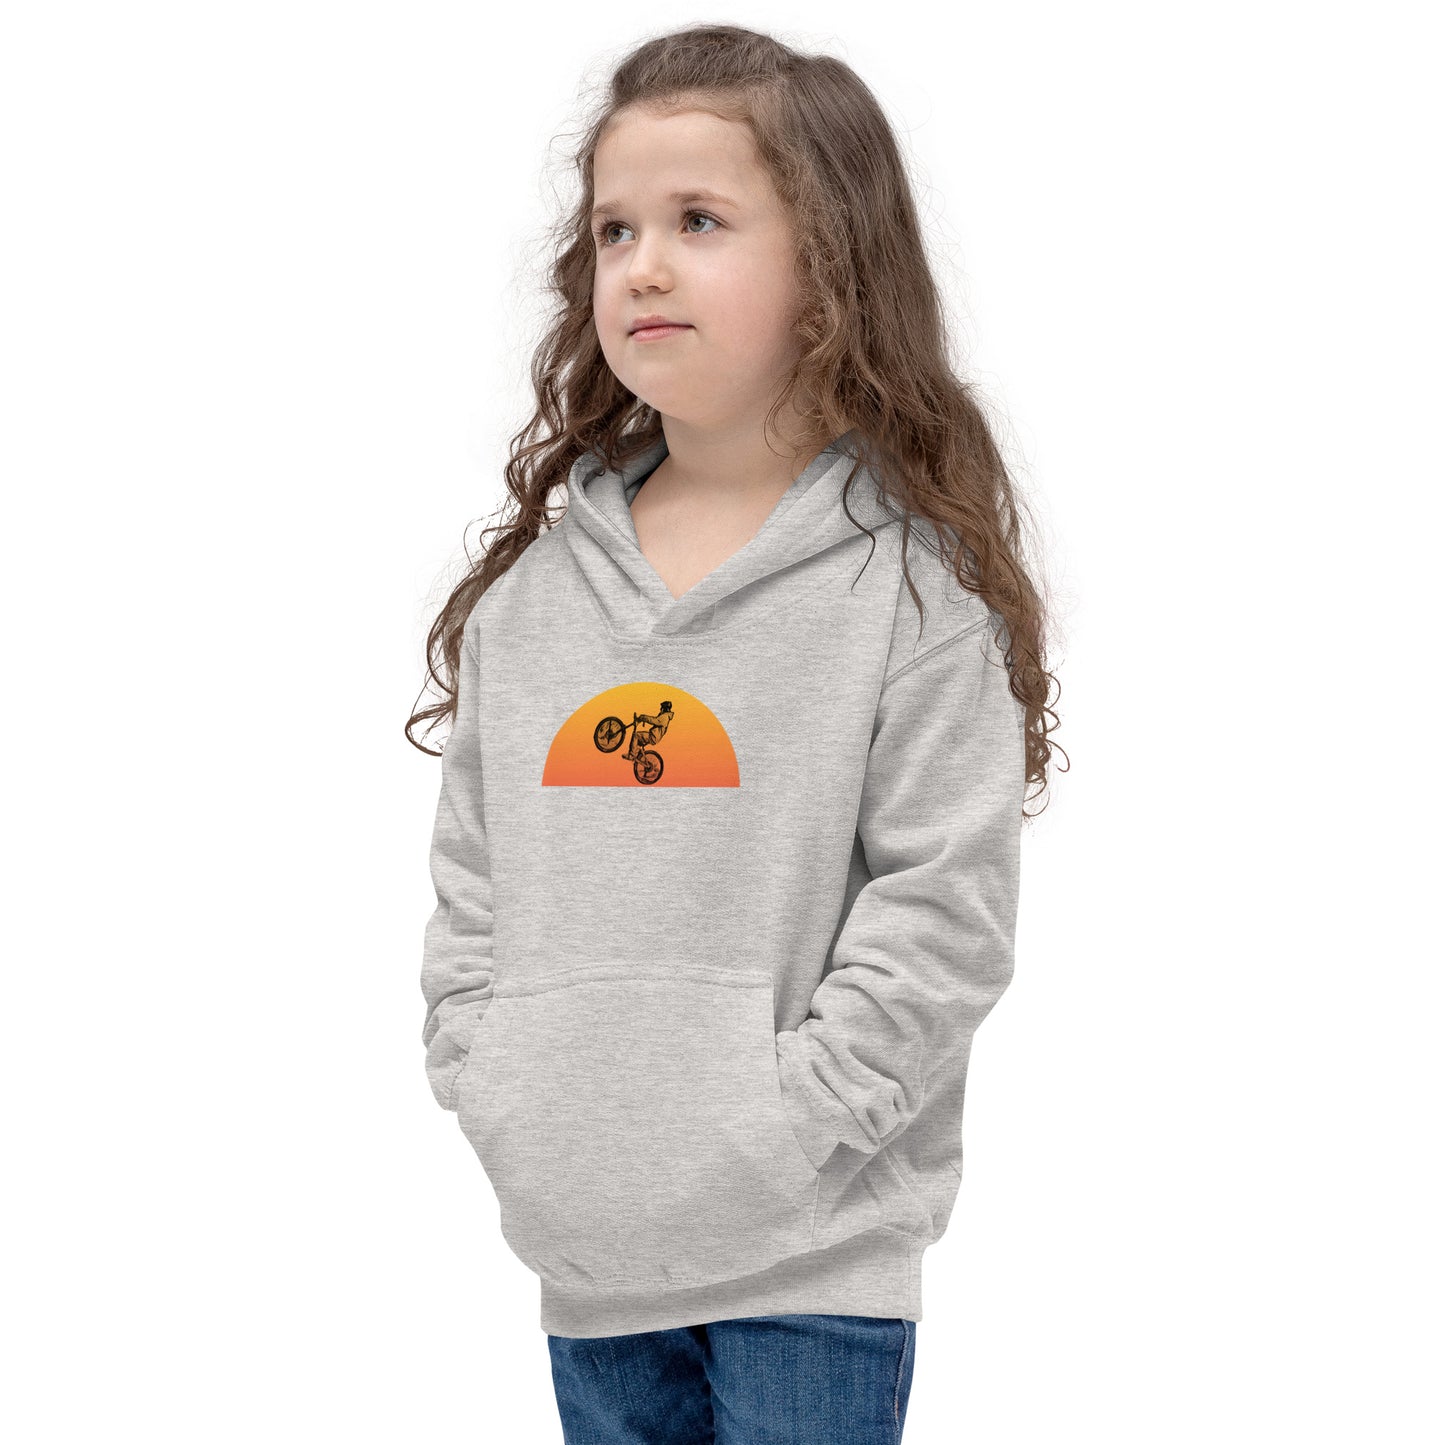 Kids are way cooler than adults/Wheelieing off into the sunset (hoodie)